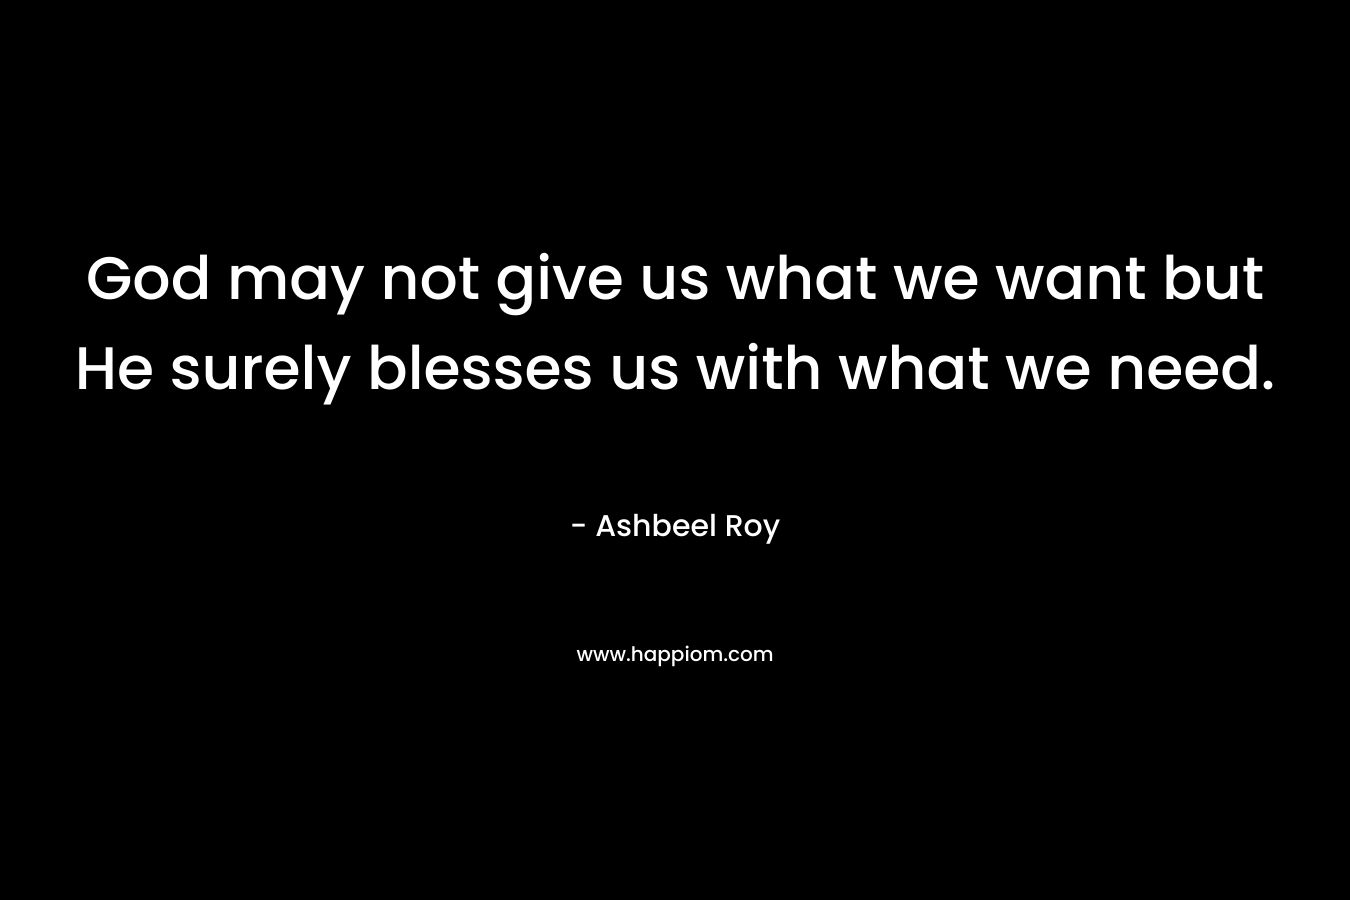 God may not give us what we want but He surely blesses us with what we need.